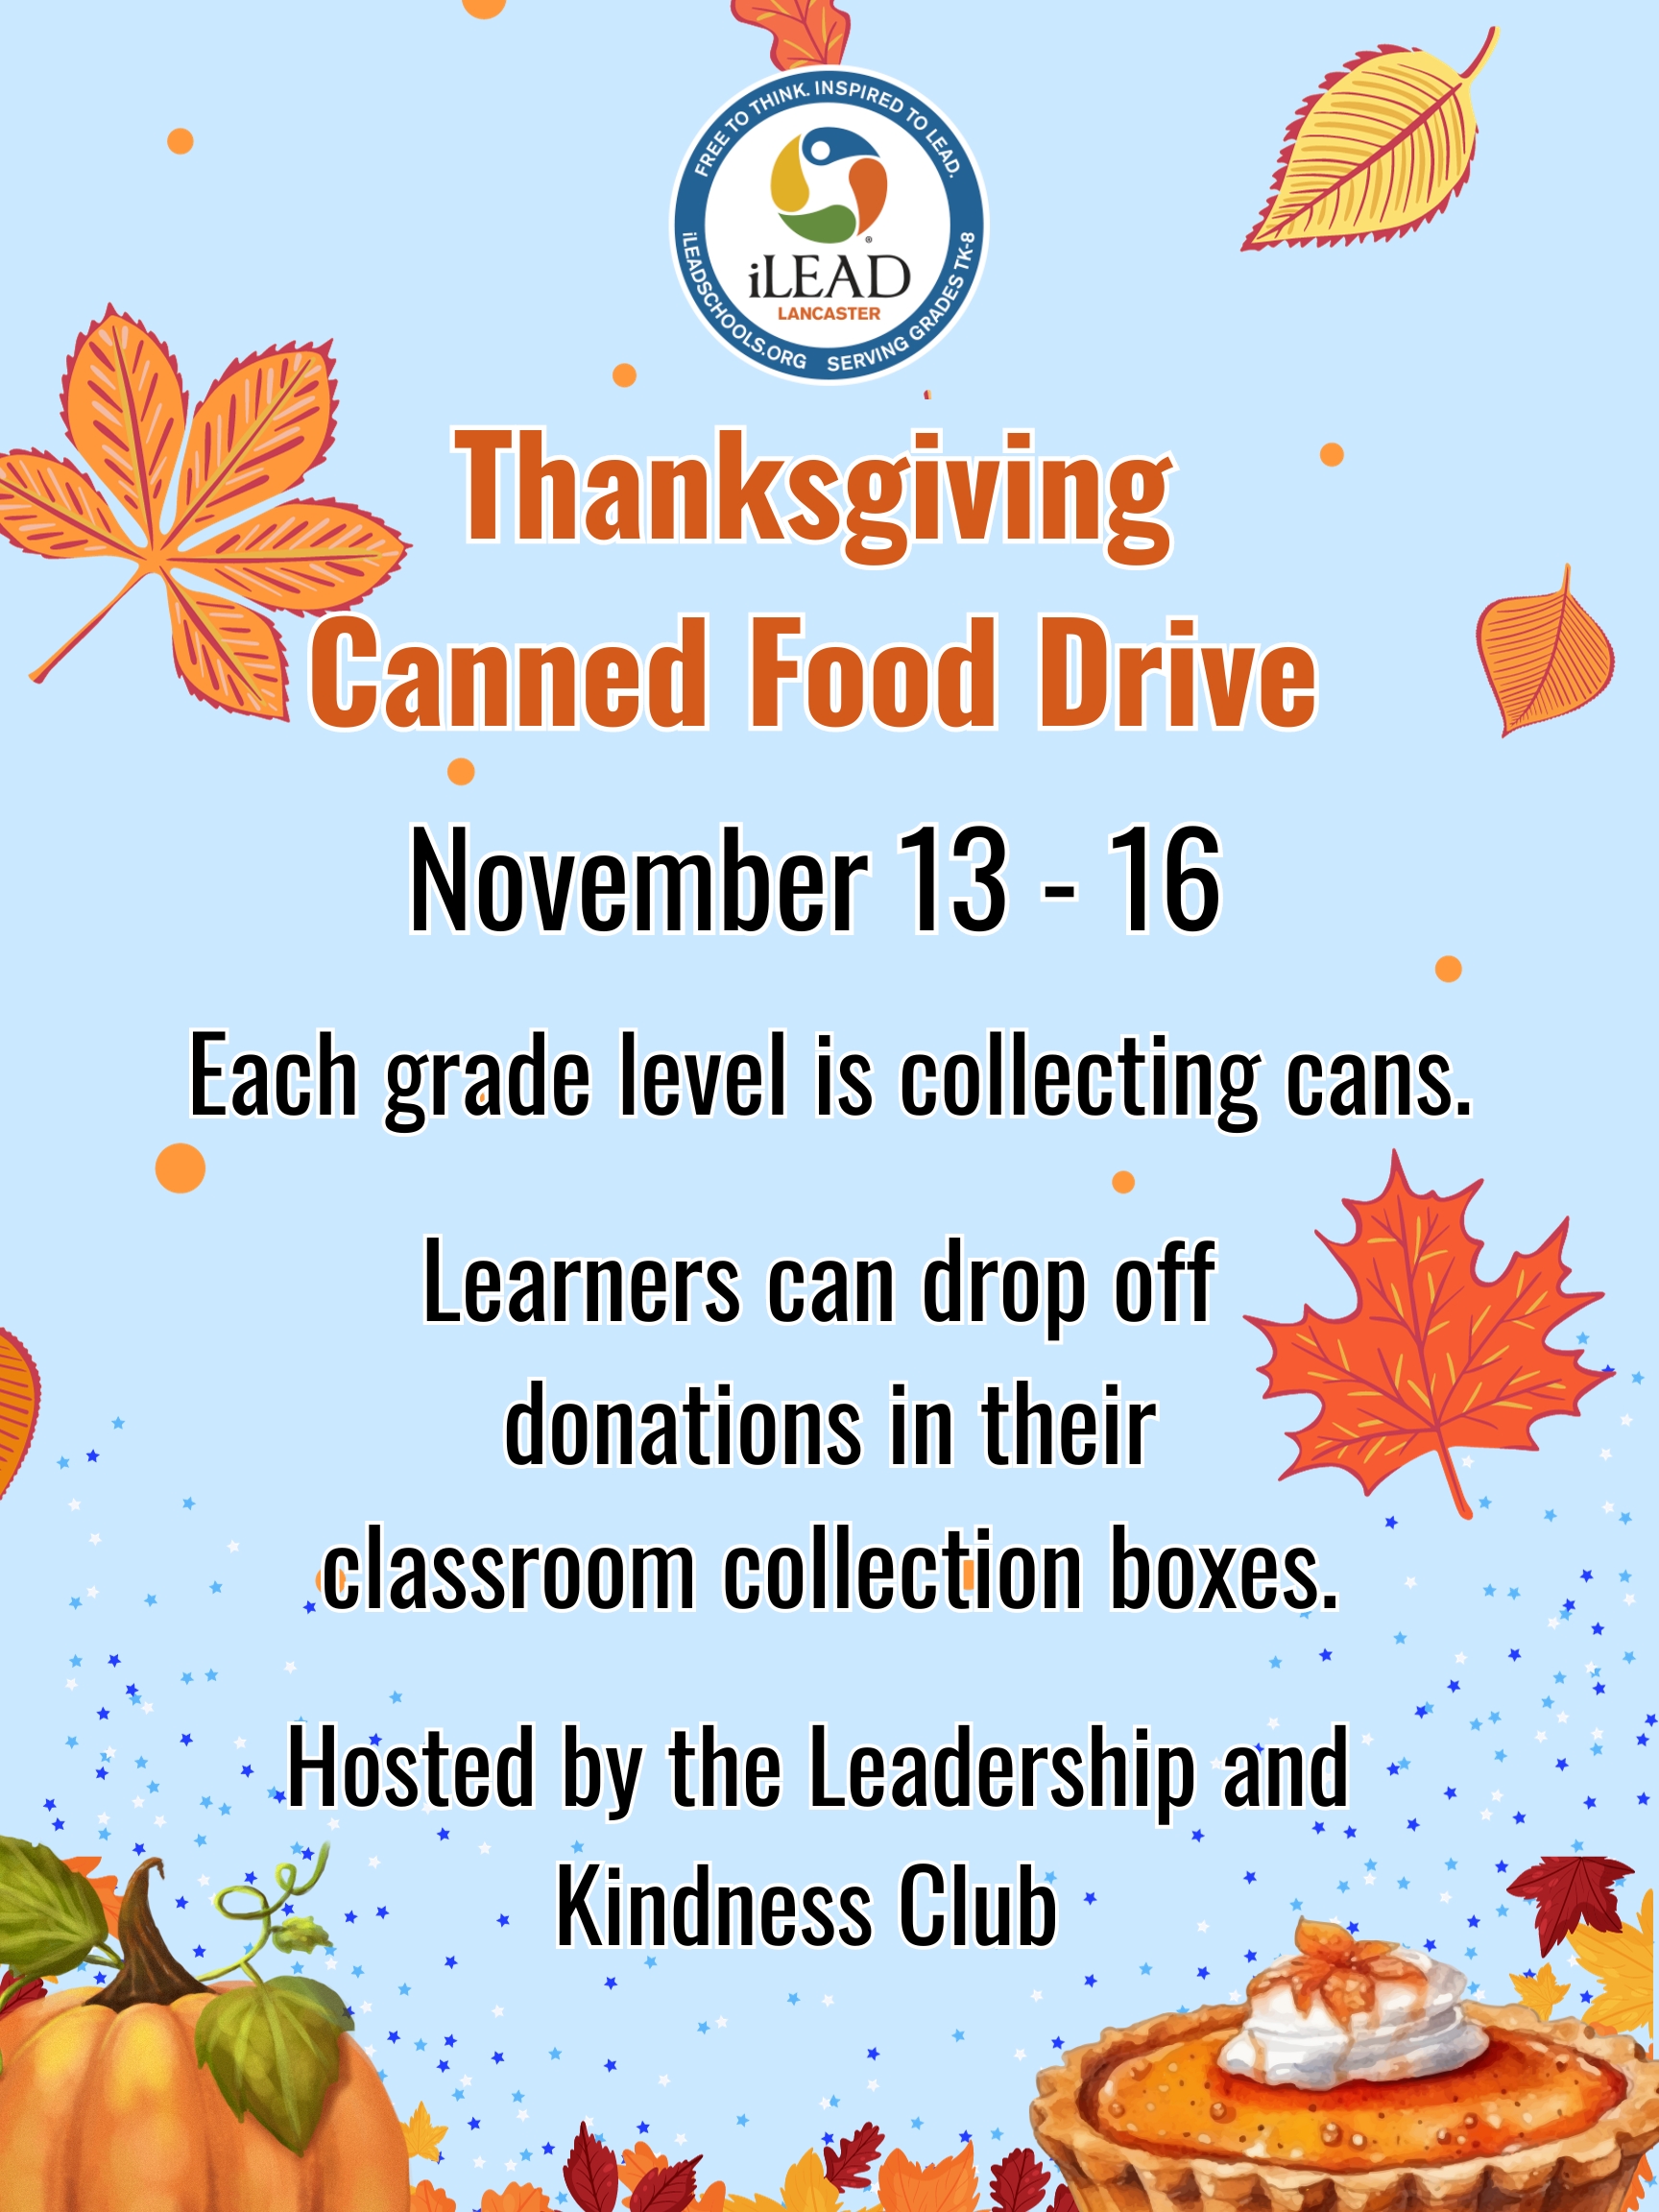 iLEAD Lancaster Thanksgiving Canned Food Drive